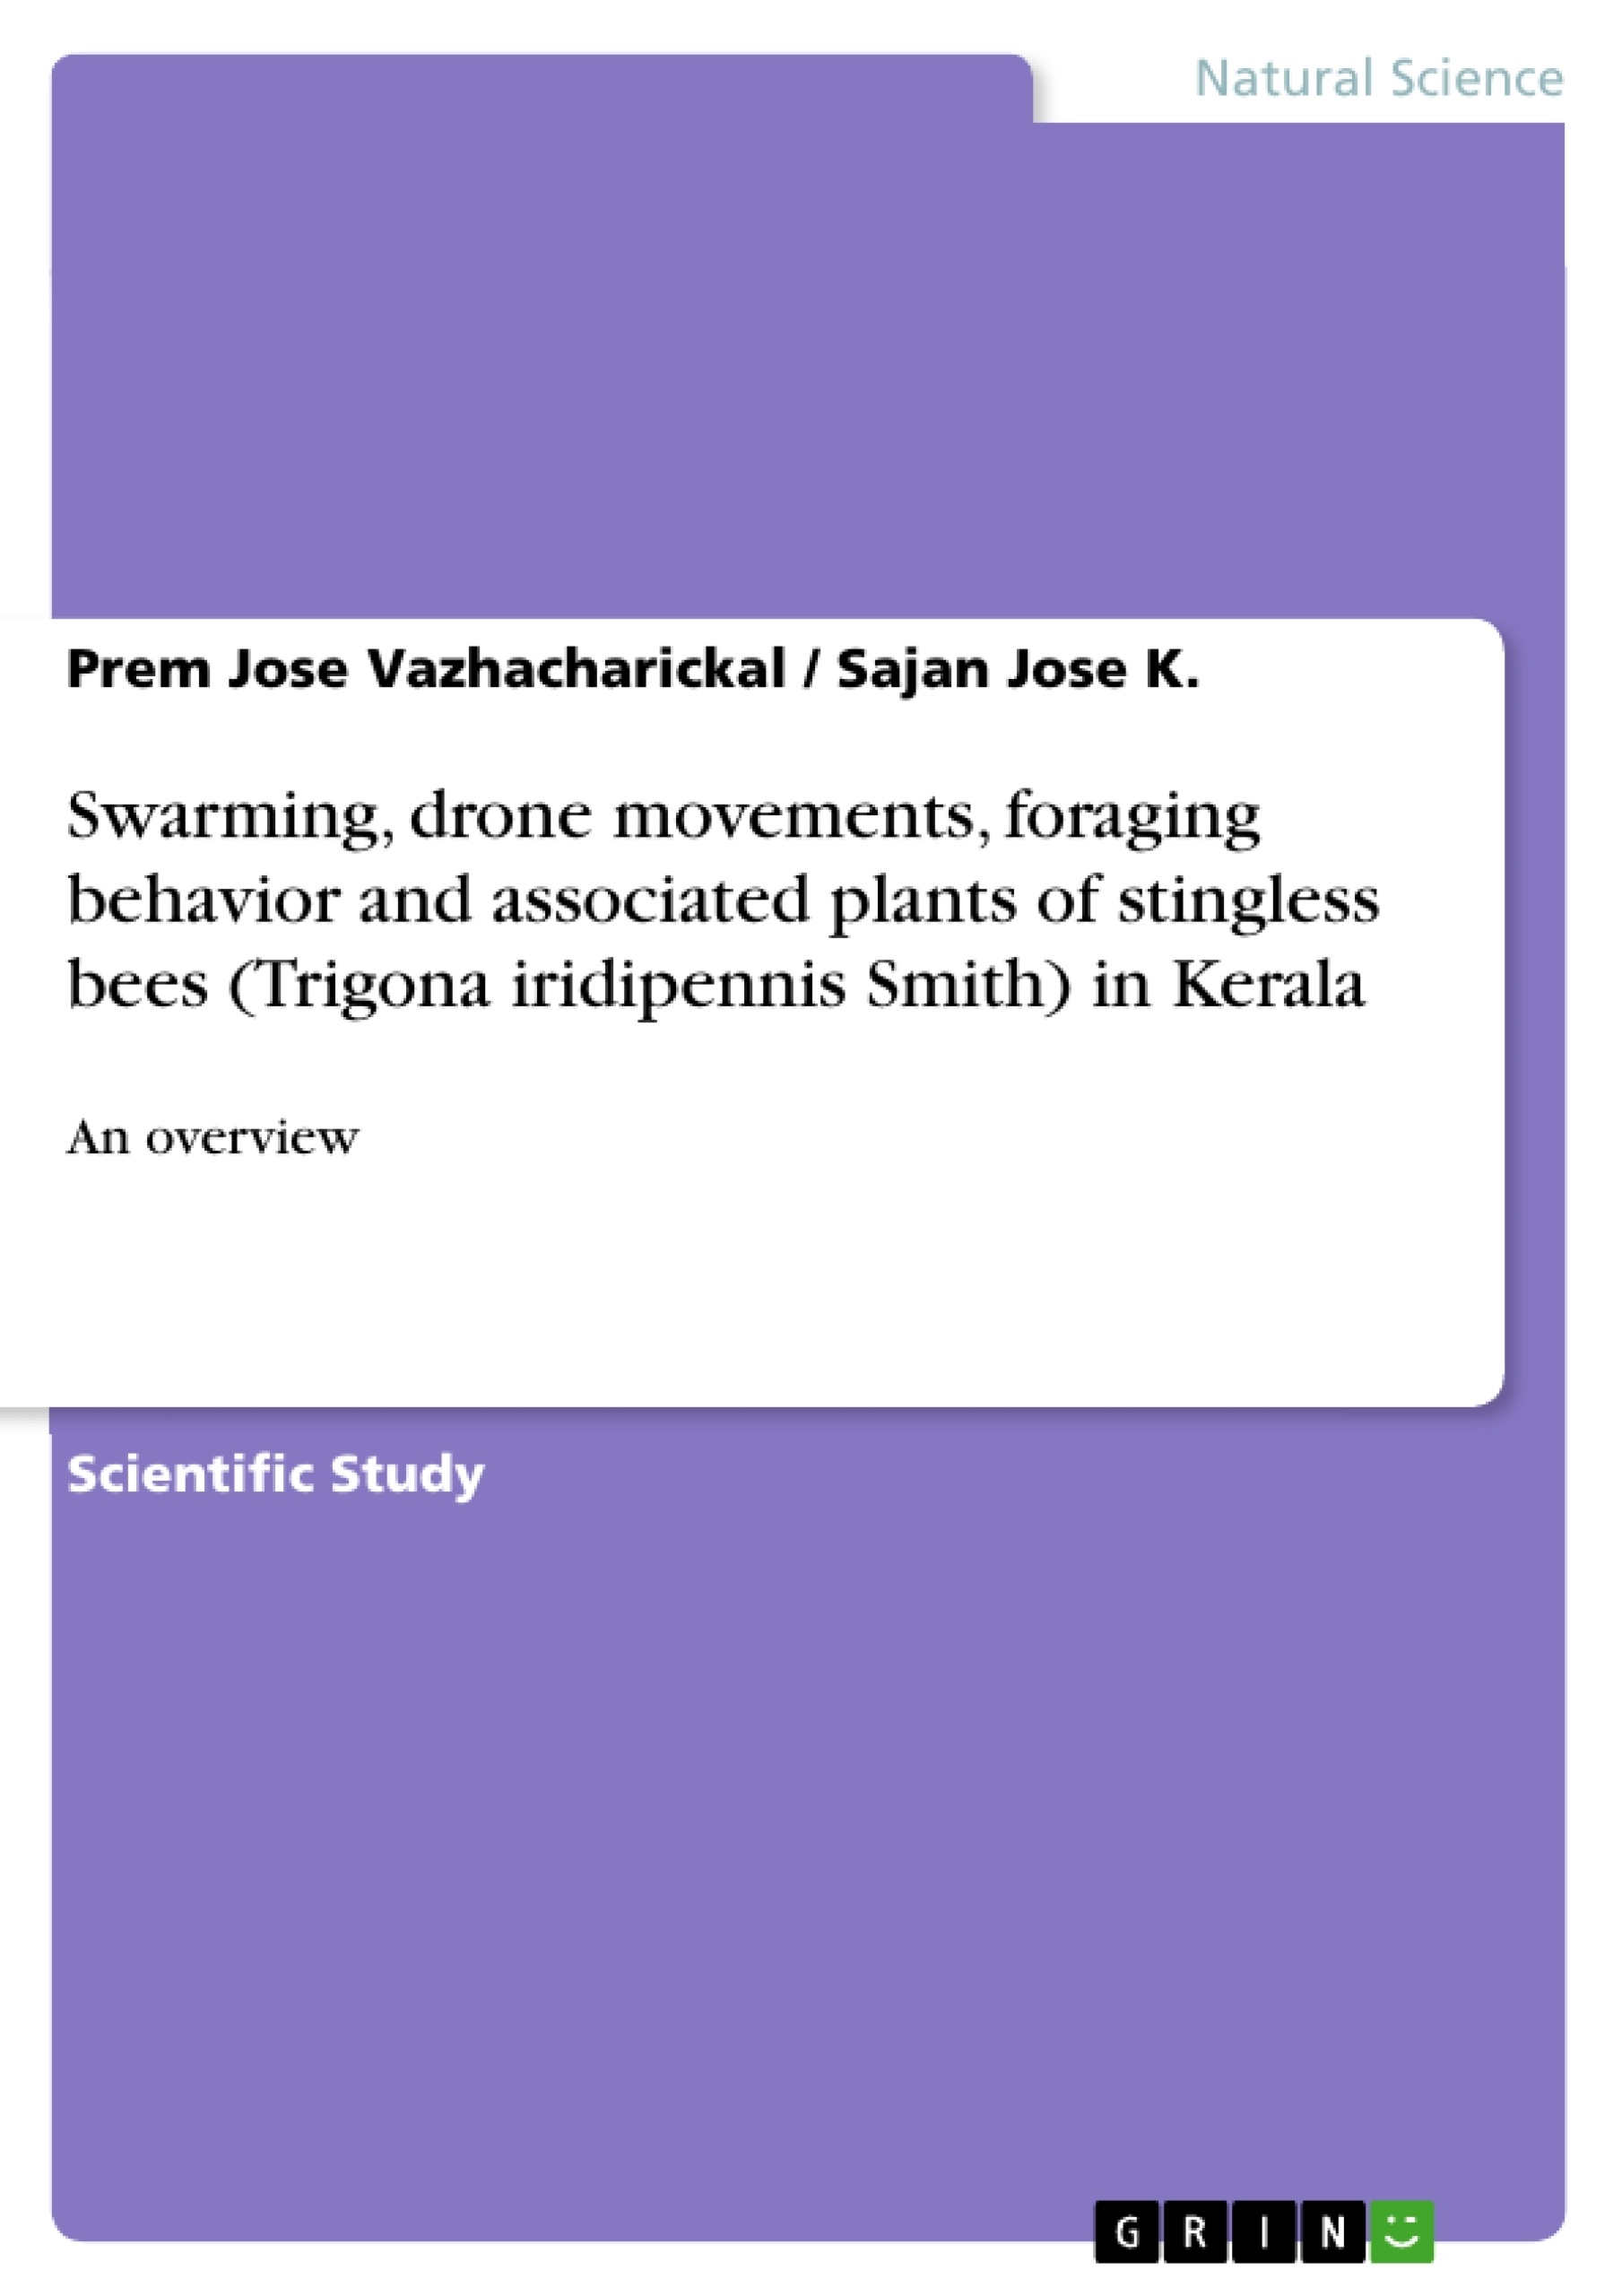 Titel: Swarming, drone movements, foraging behavior and associated plants of stingless bees (Trigona iridipennis Smith) in Kerala